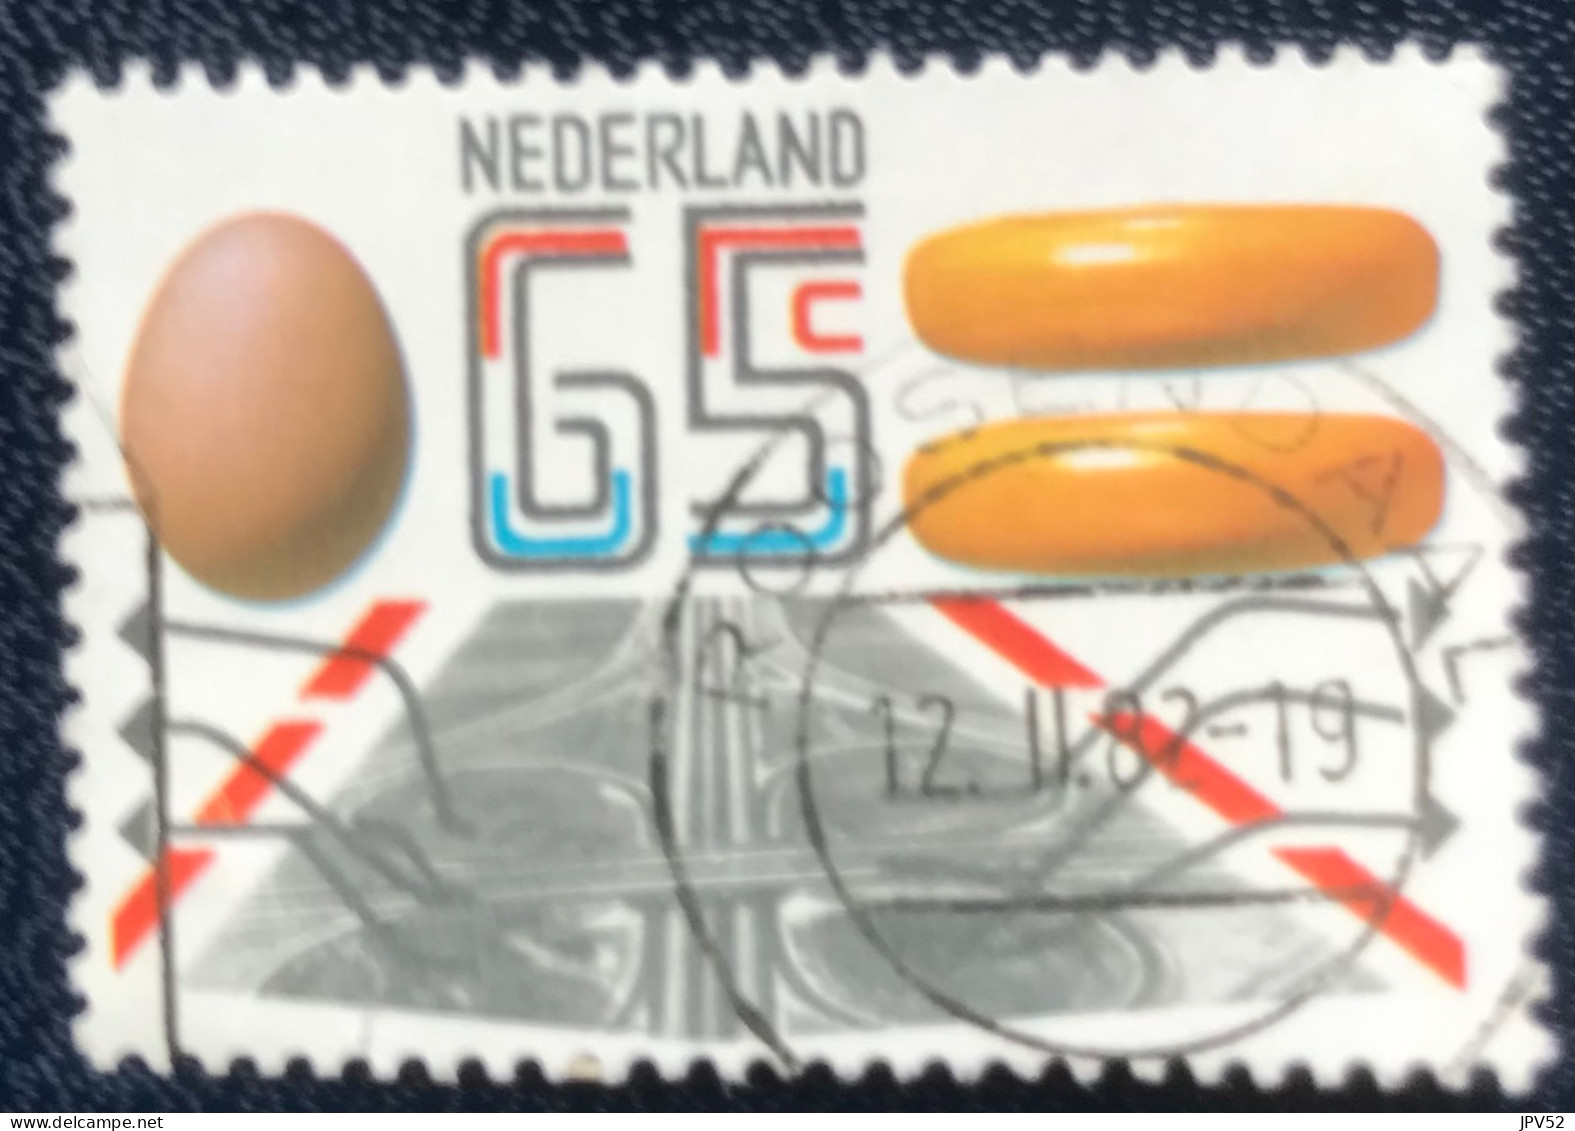 Nederland - C1/10 - 1981 - (°)used - Michel 1192 - Export - ROOSENDAAL - Used Stamps